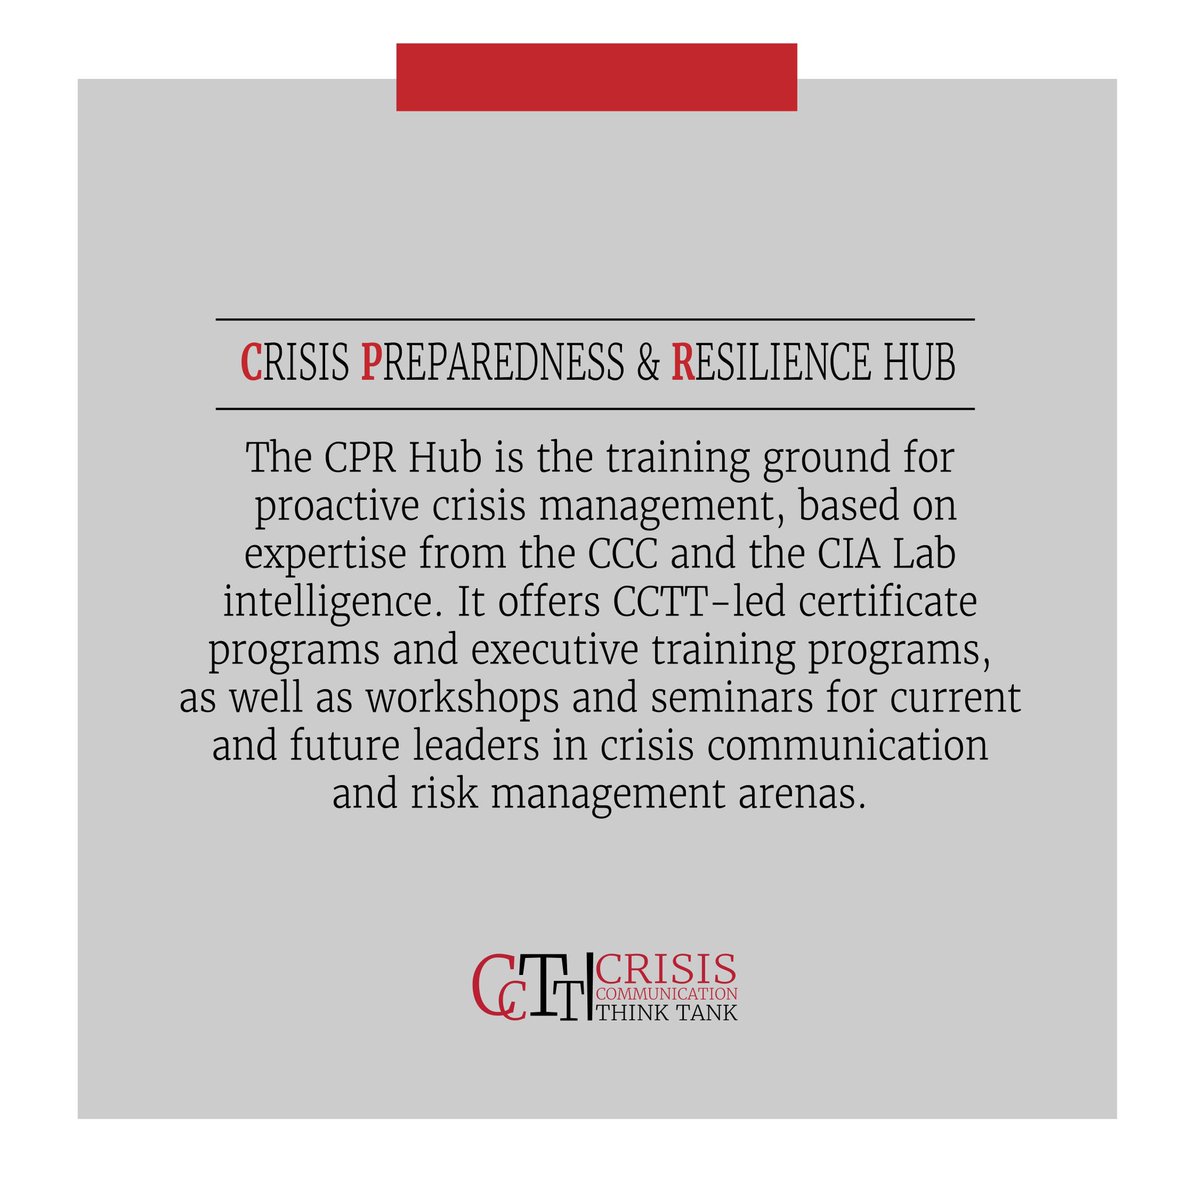 Introducing the new structure of UGA’s Crisis Communication Think Tank (CCTT). The CCTT is an umbrella that leads the Crisis Communication Coalition (CCC), Crisis Insights and Analytics (CIA) Lab and Crisis Preparedness and Resilience (CPR) Hub.